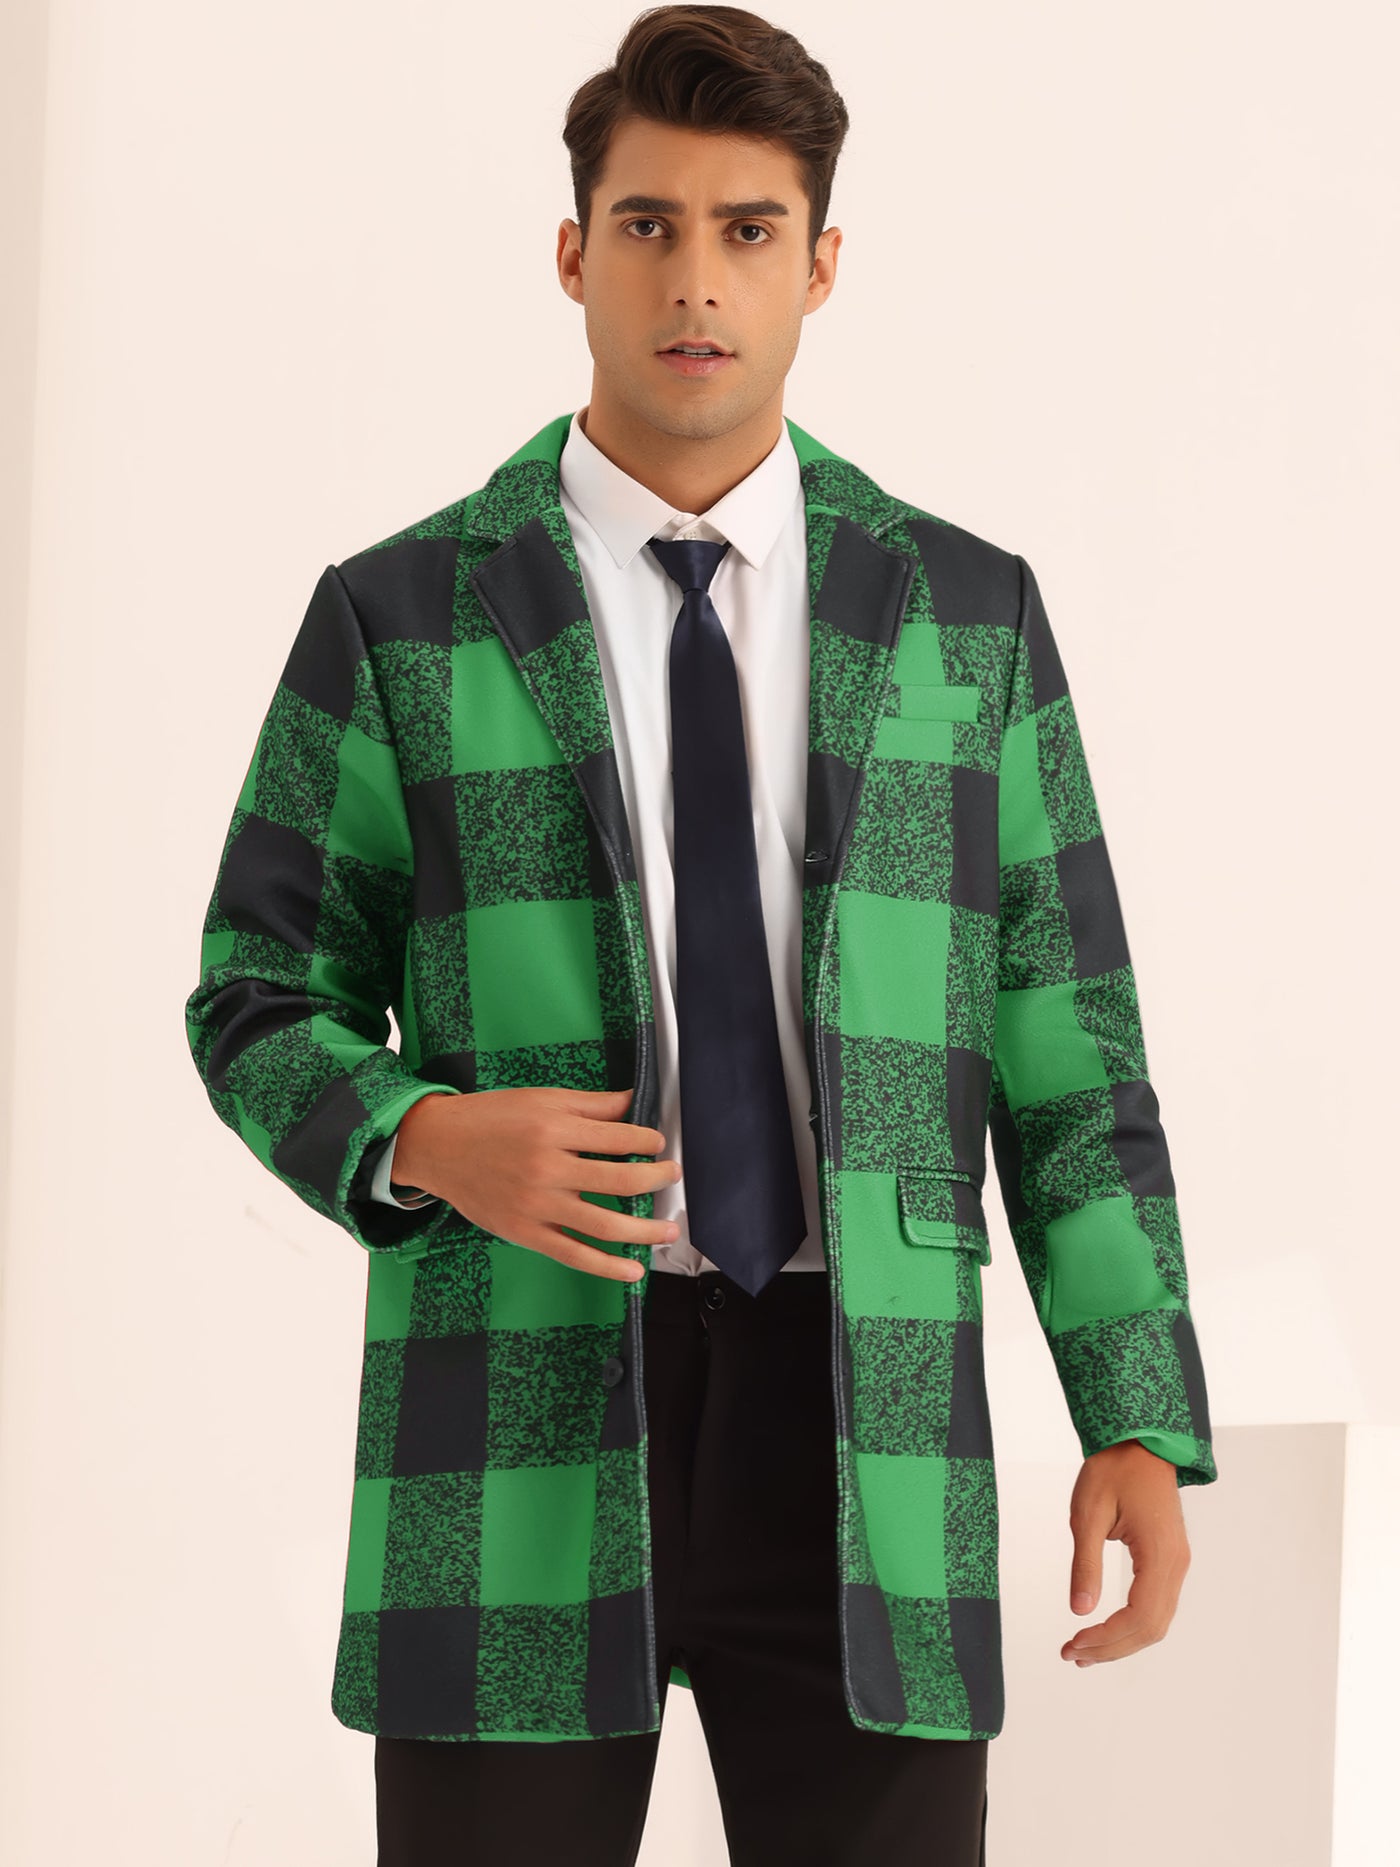 Bublédon Plaid Overcoat for Men's Notch Lapel Color Block Single Breasted Formal Checked Coat